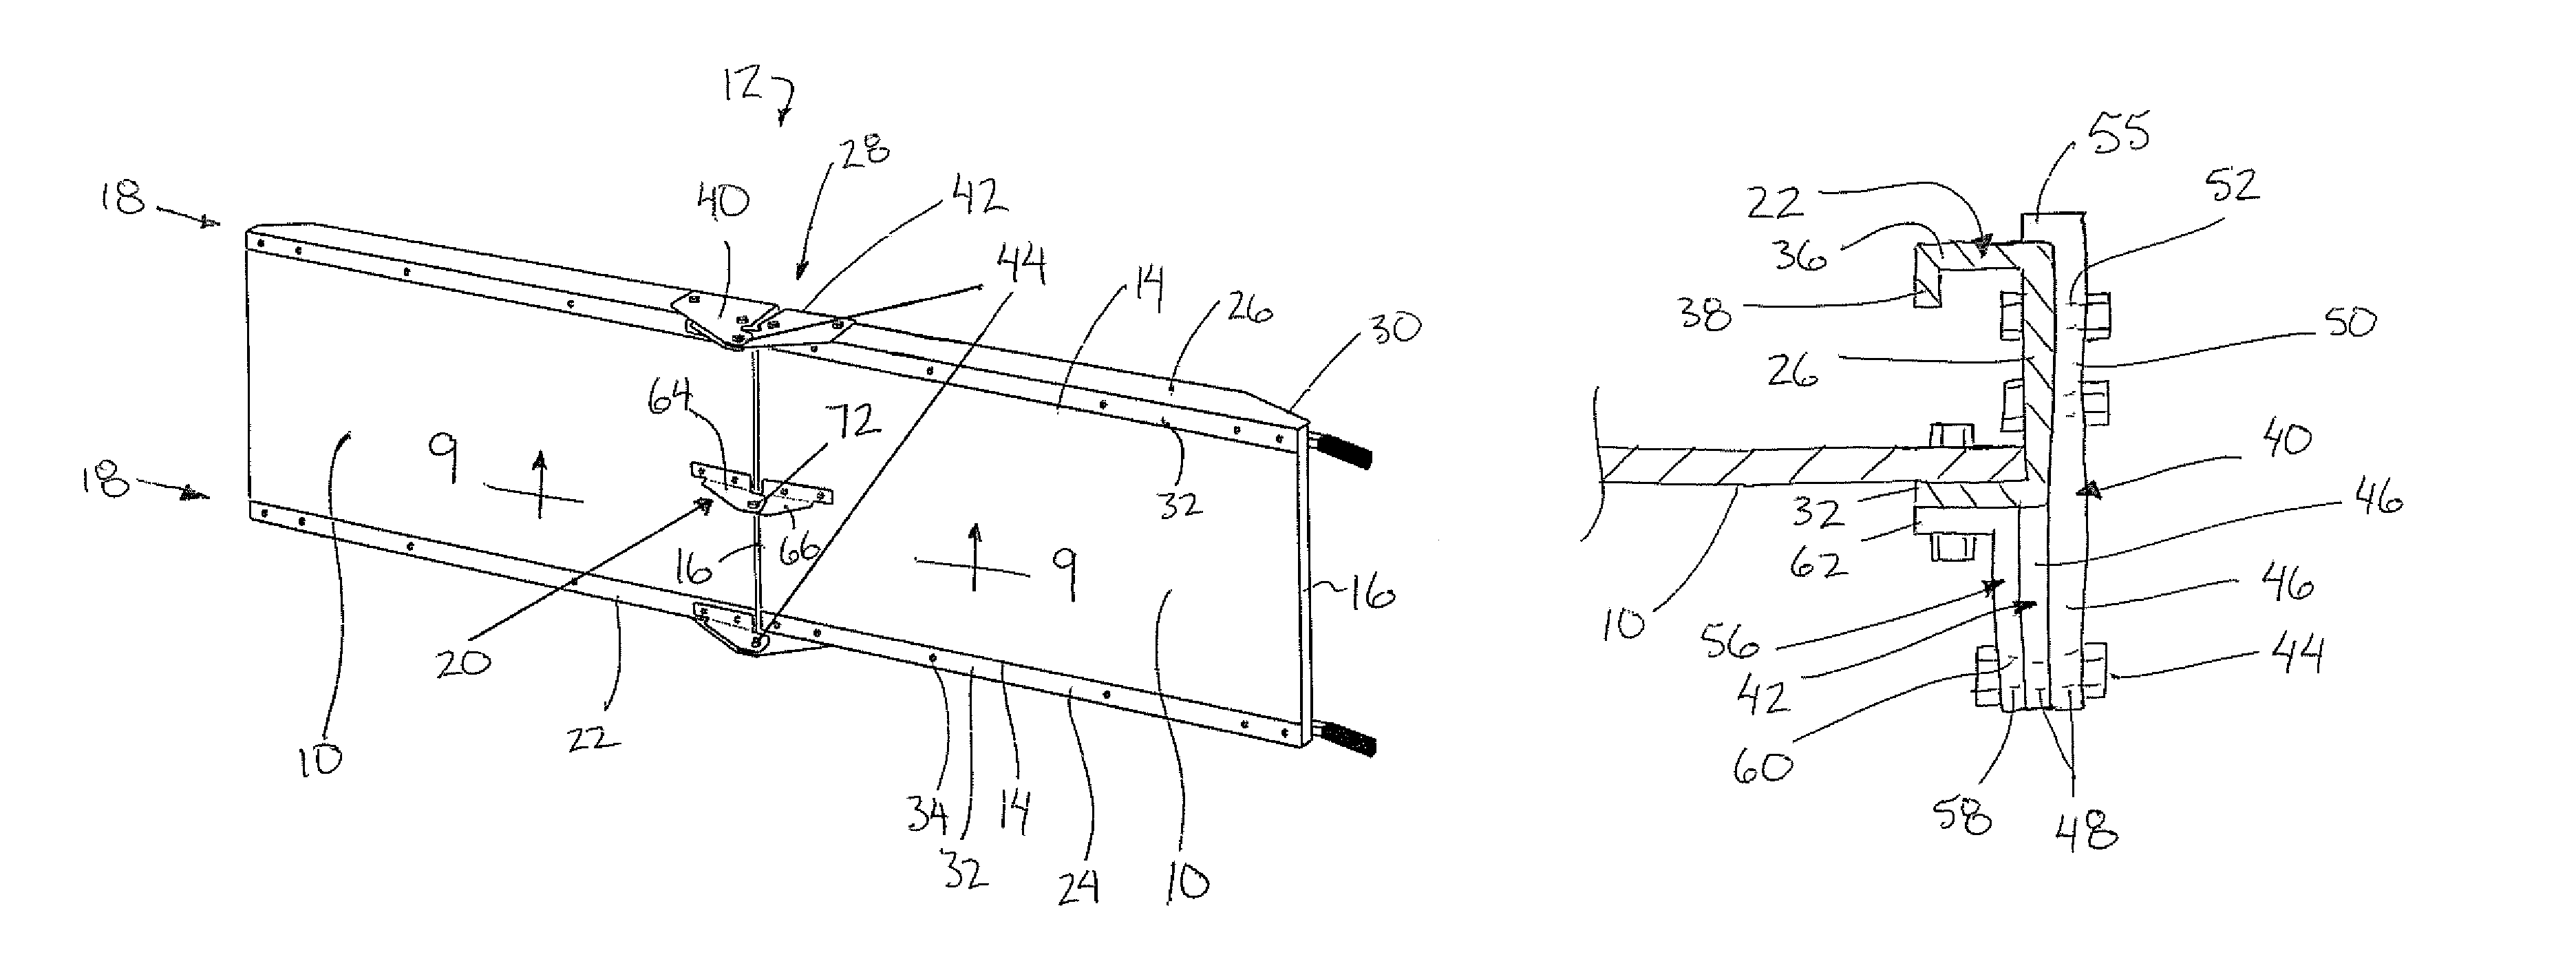 Hinged ramp assembly